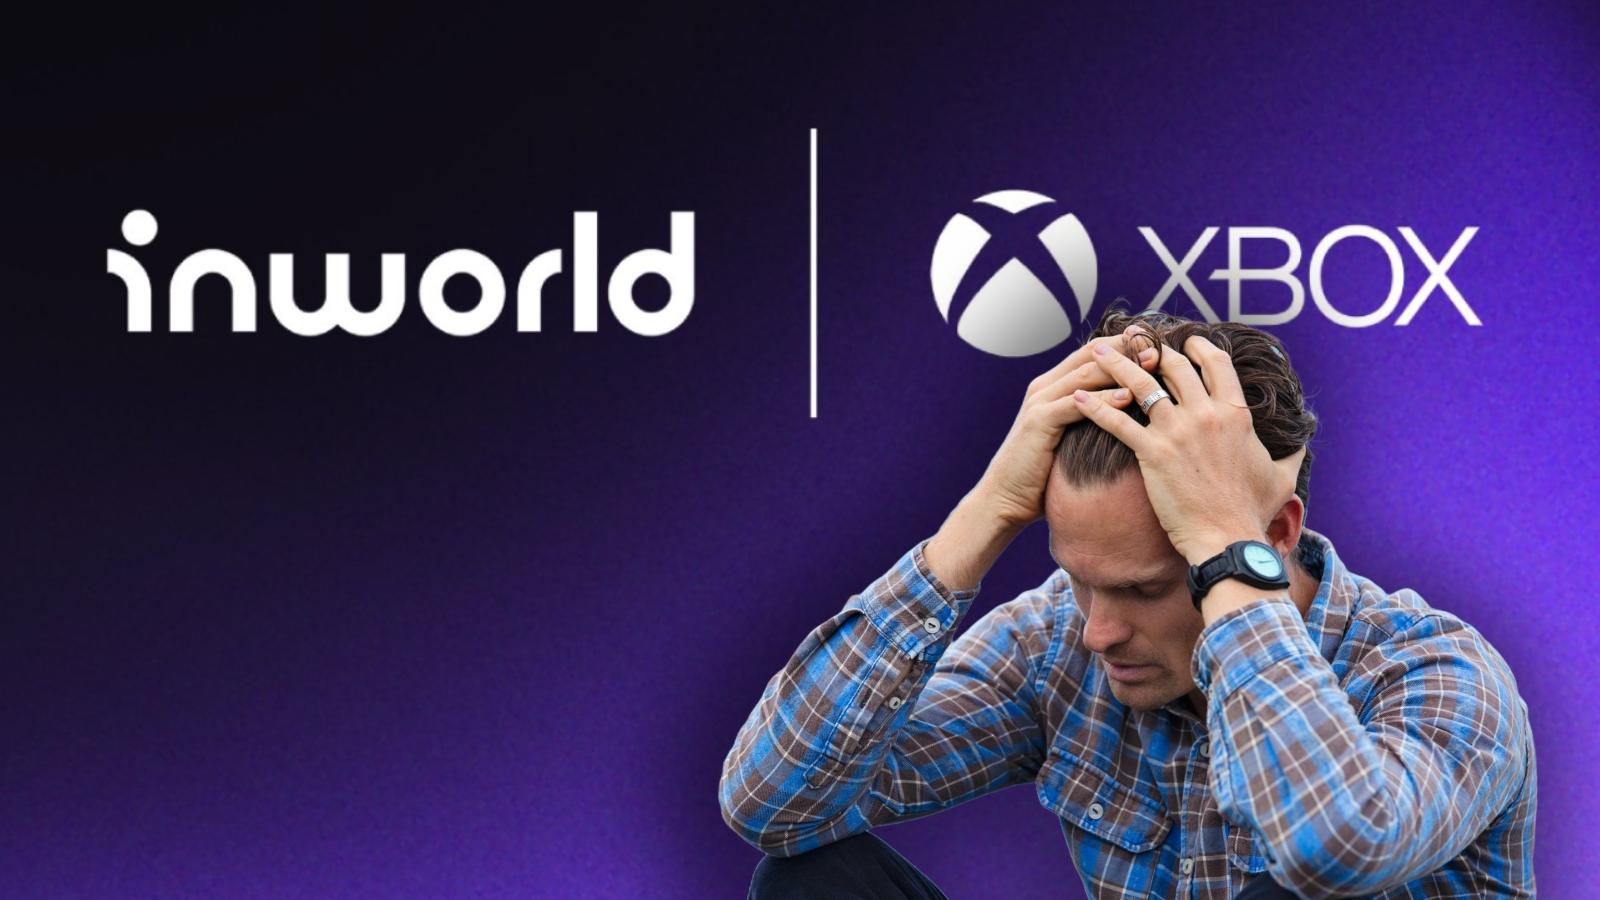 Xbox Logo with Inworld logo on purple background with a man with his head in his hands